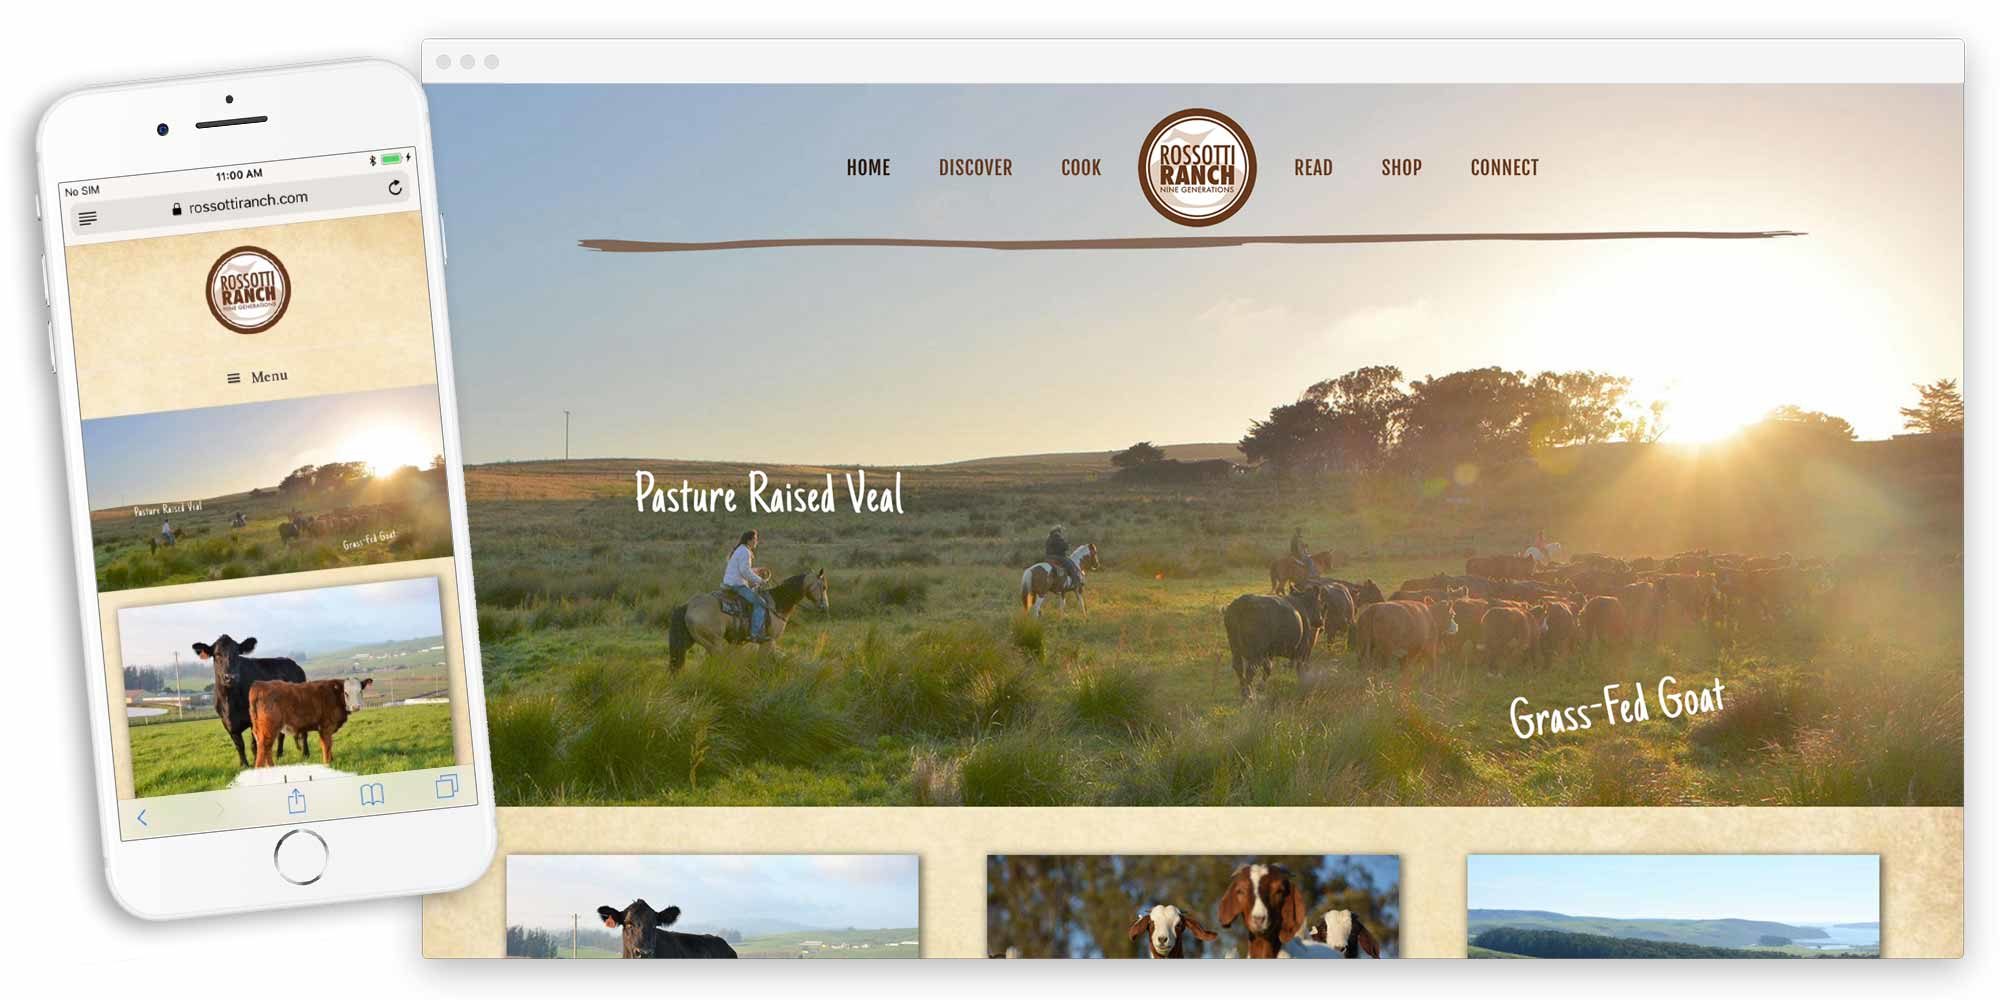 rossotti ranch website by lobstervine